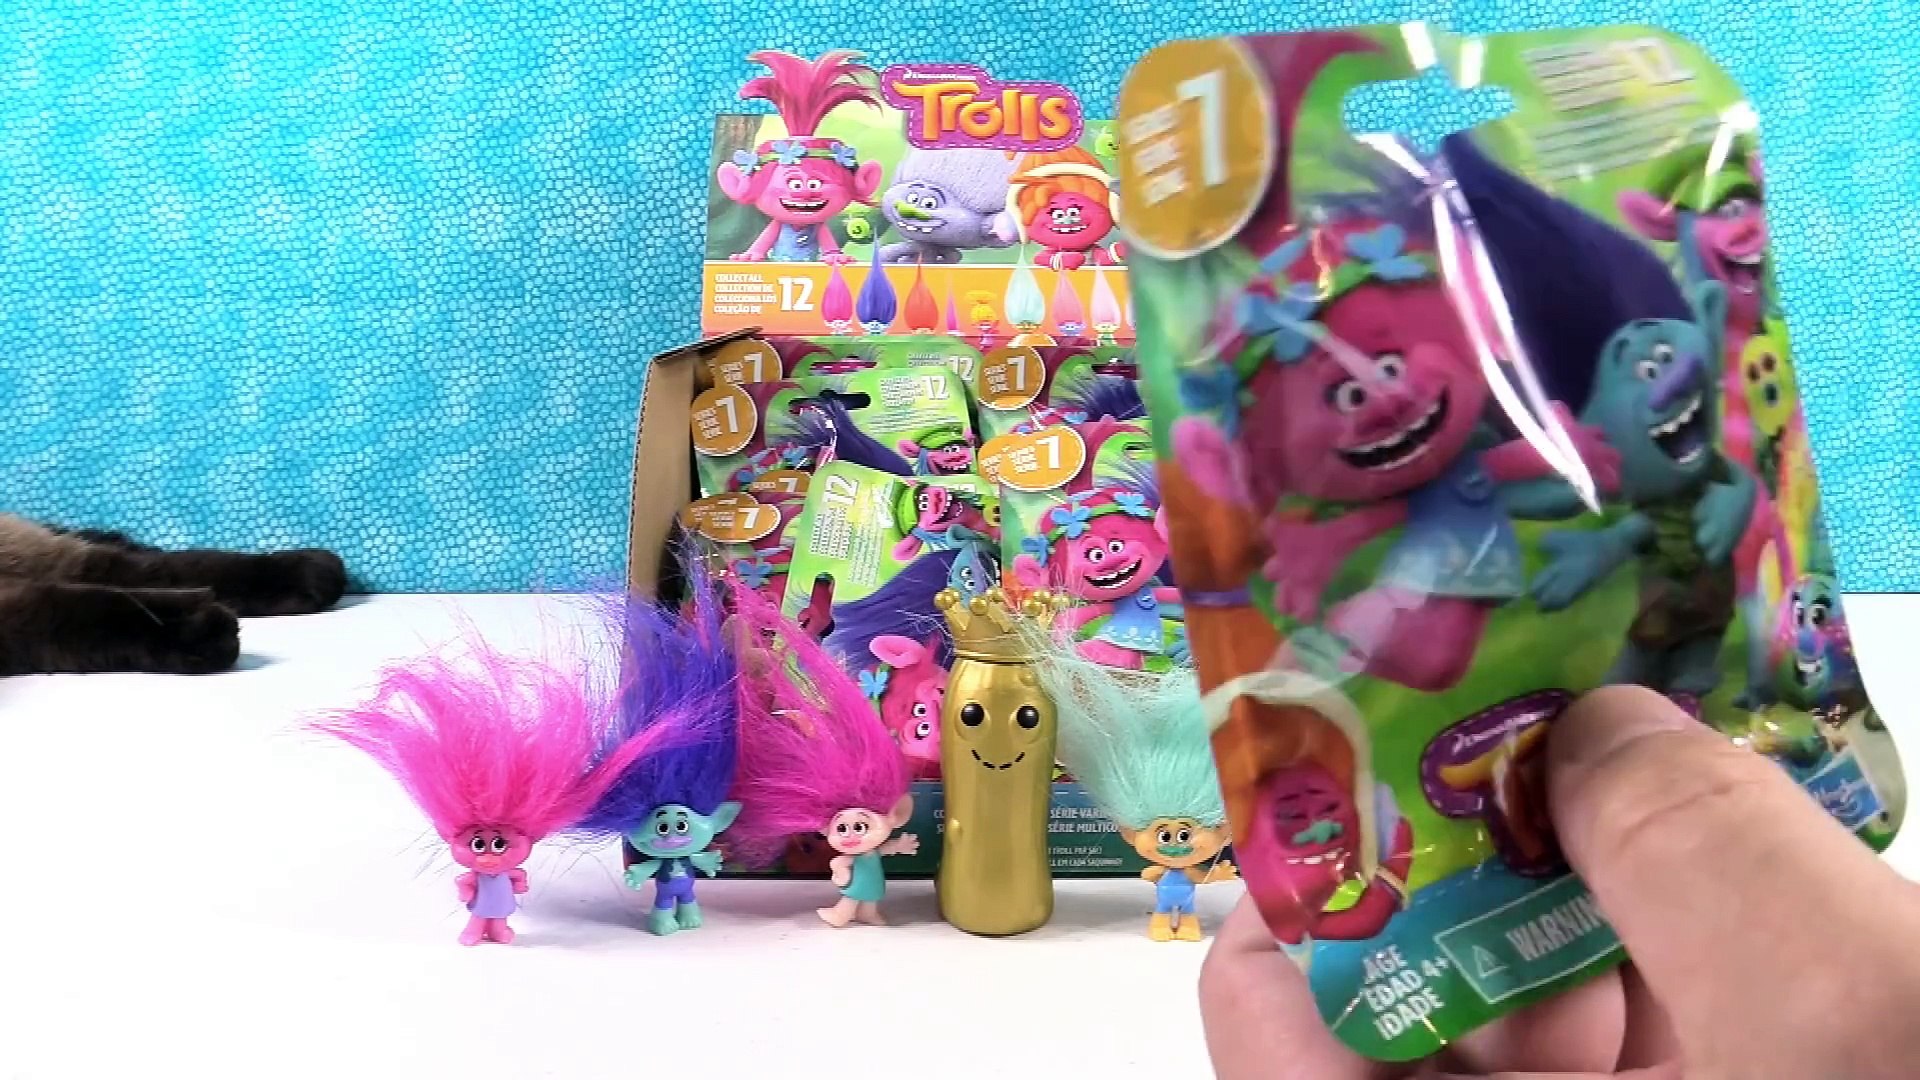 Paul vs Shannon Trolls Series 7 Blind Bag Challenge Toy Review _  PSToyReviews - Video Dailymotion